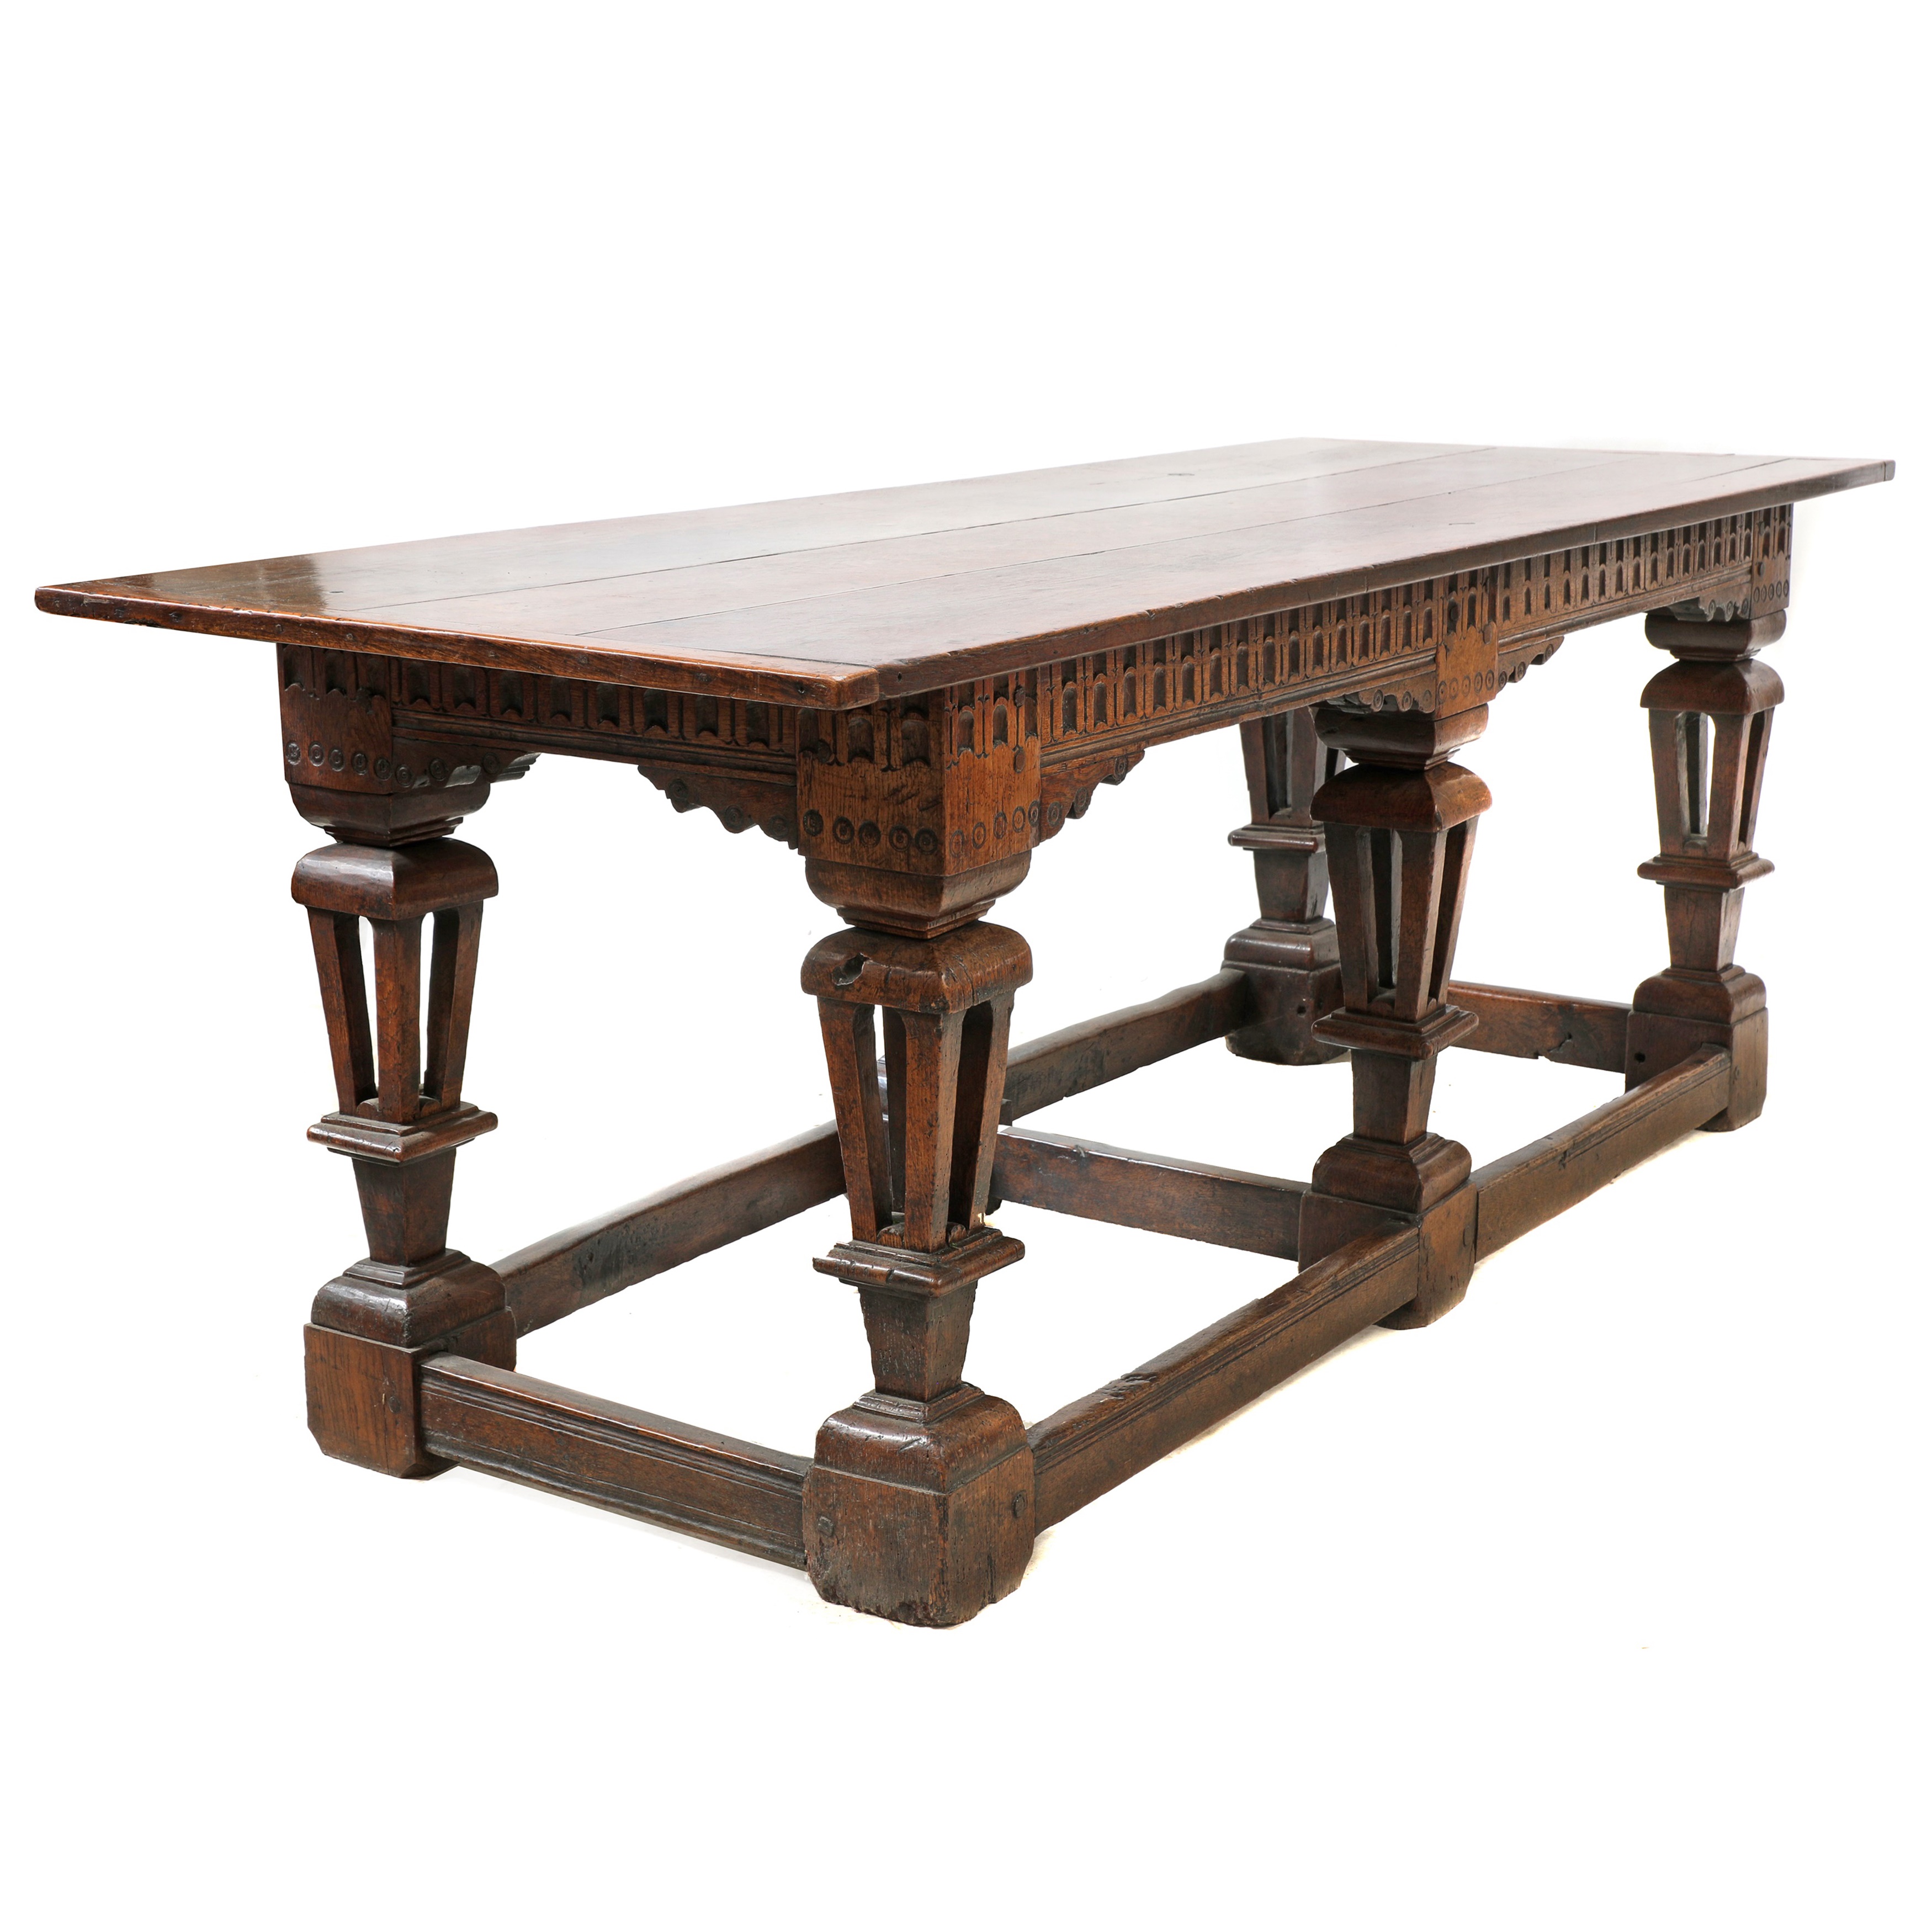 A Flemish oak refectory table, 17th century